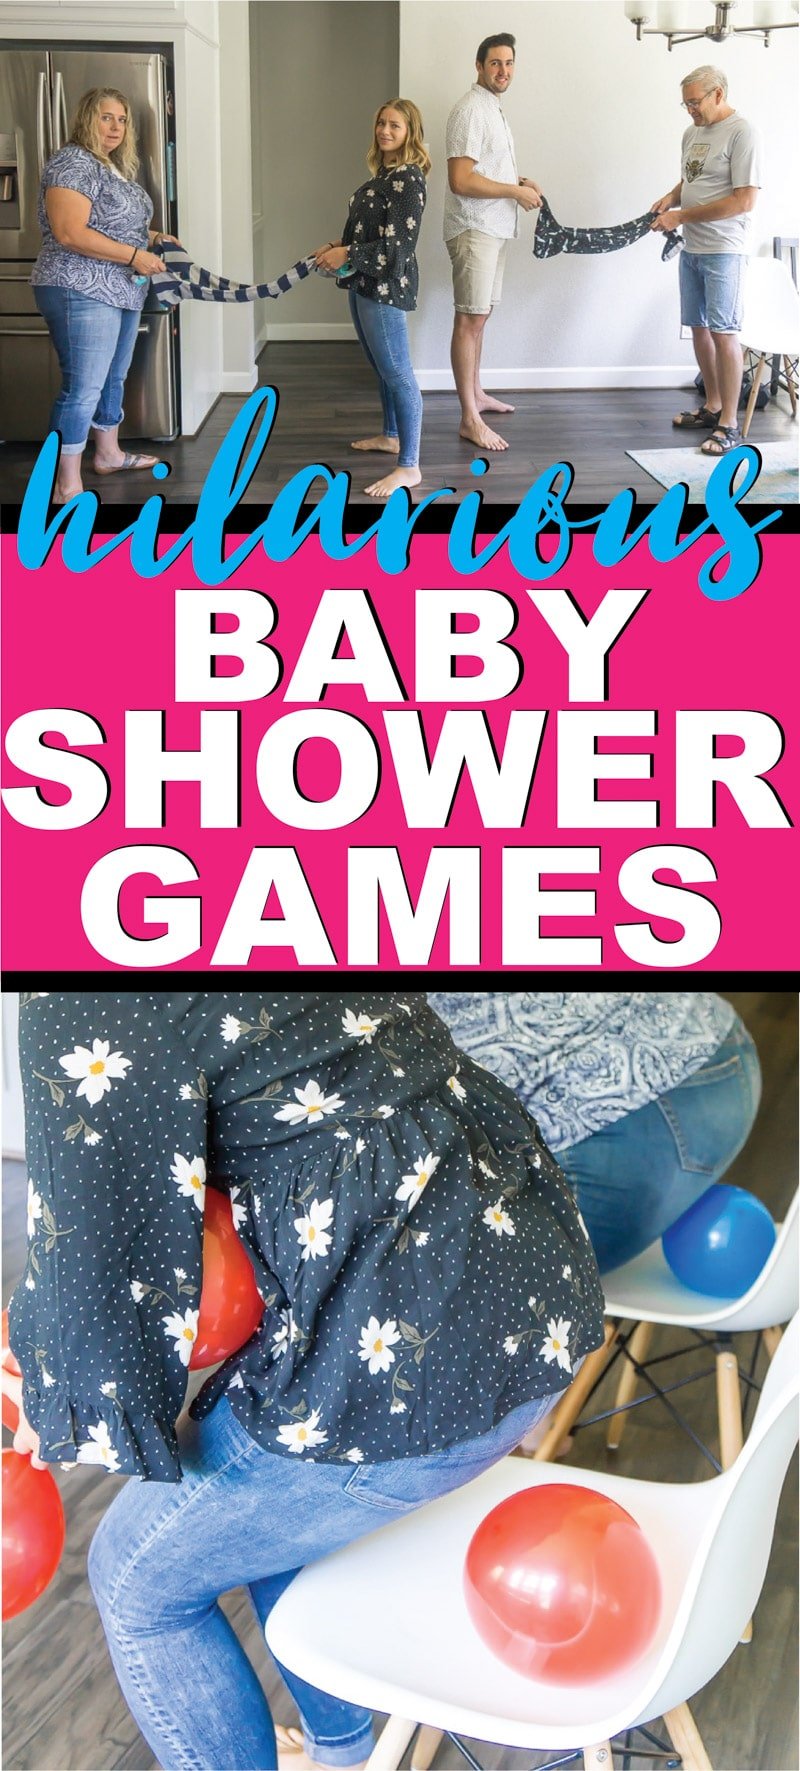 fun-game-ideas-for-baby-showers-james-mcgill-blog